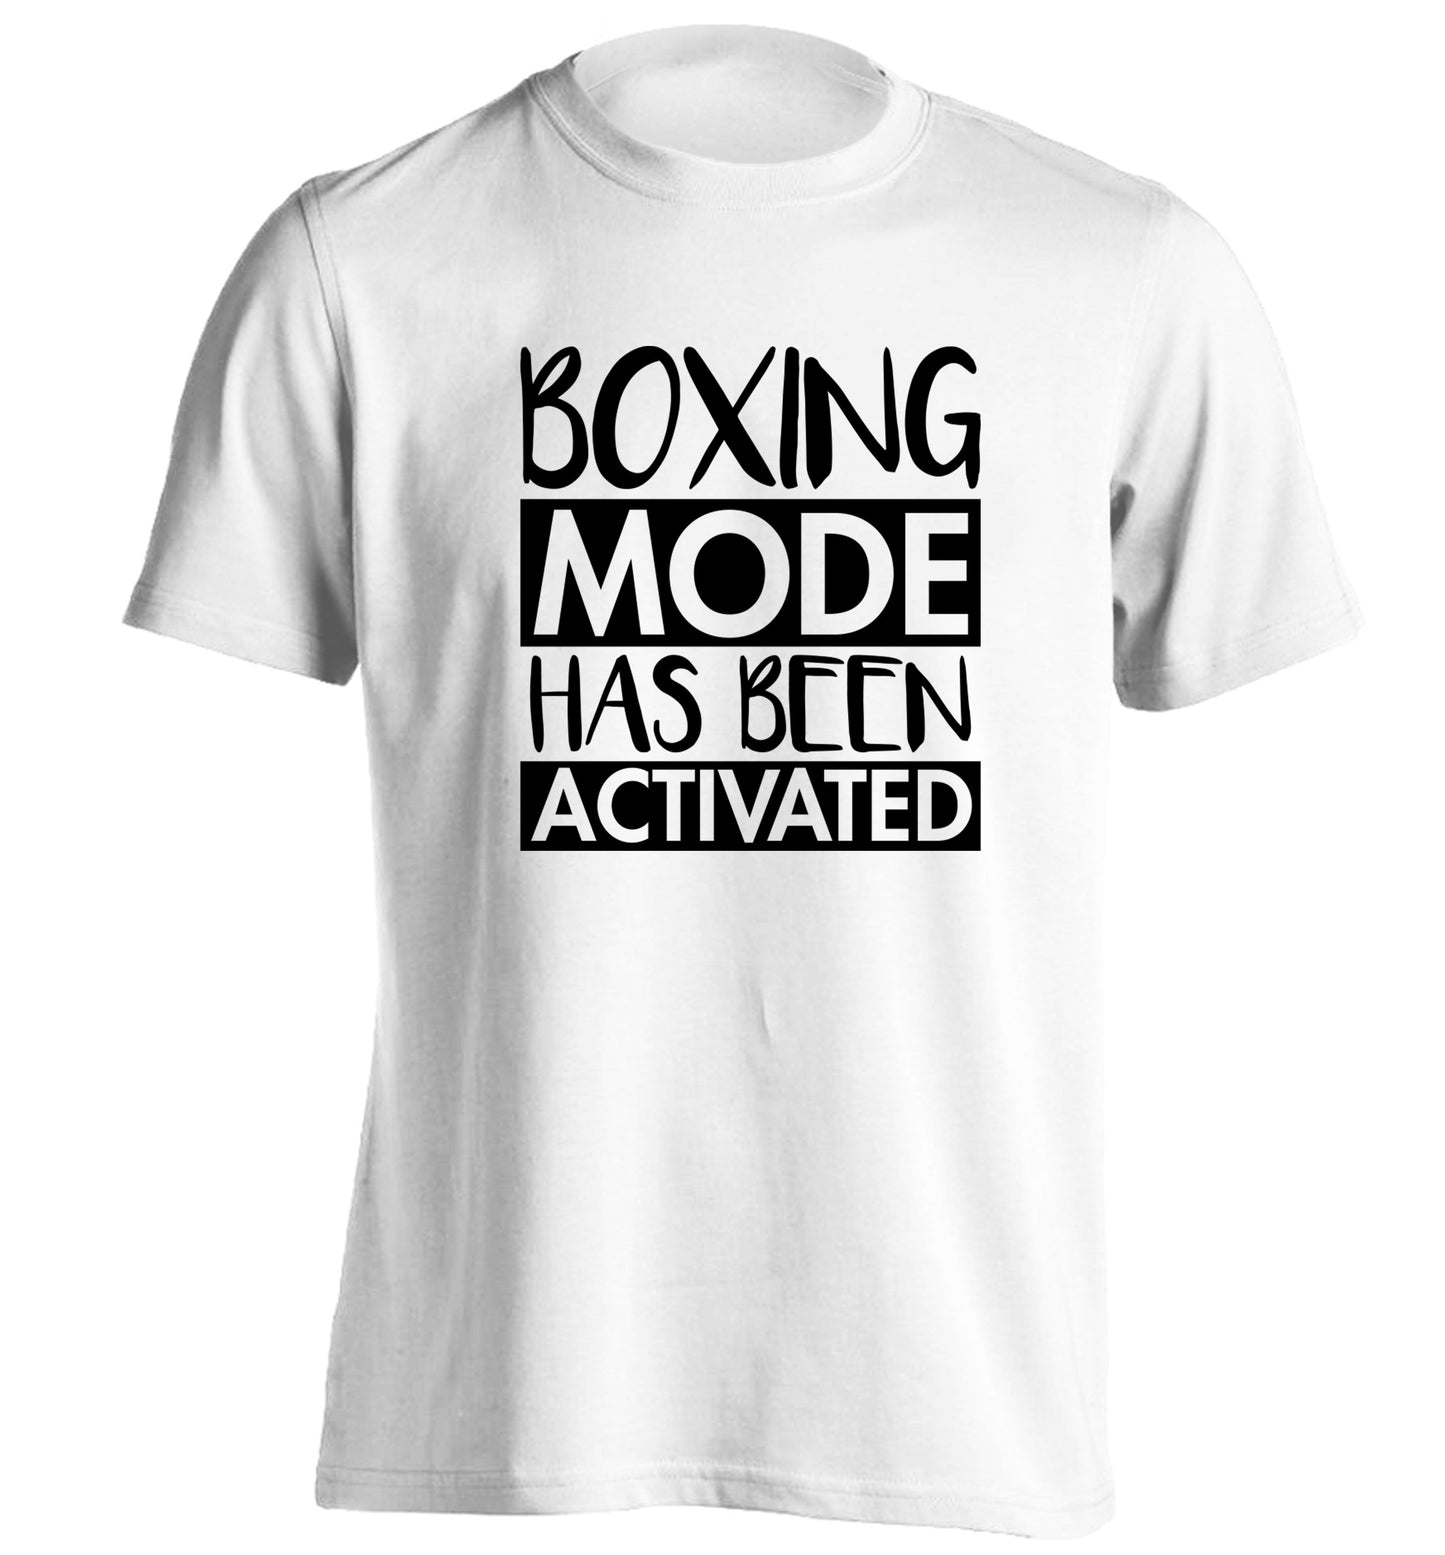 Boxing mode activated adults unisex white Tshirt 2XL